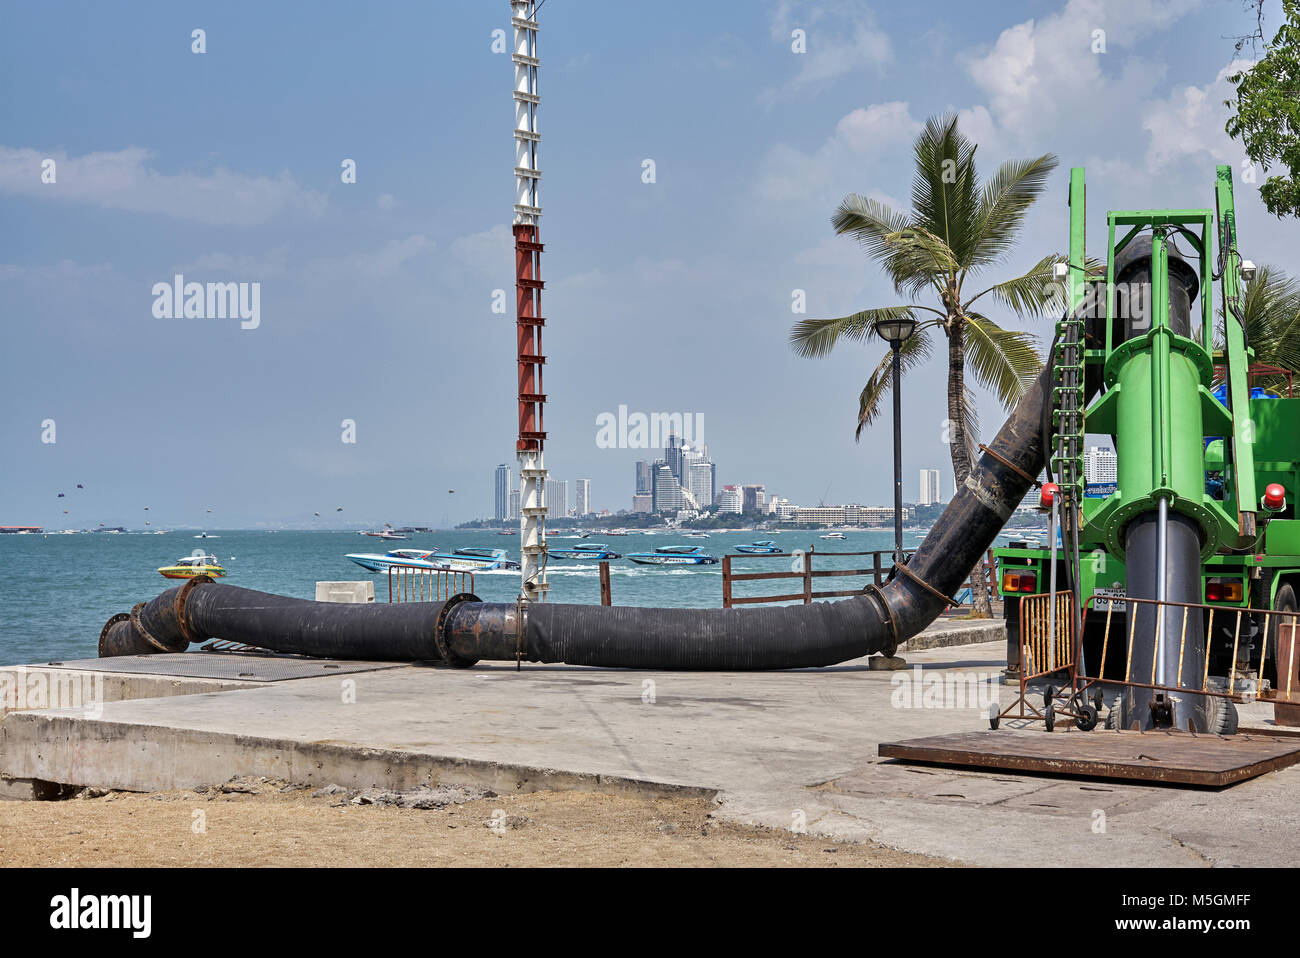 Flood control. Drainage rig utilised to remove excess rainwater from flooded street and disperse into the sea. Pattaya. Thailand Stock Photo